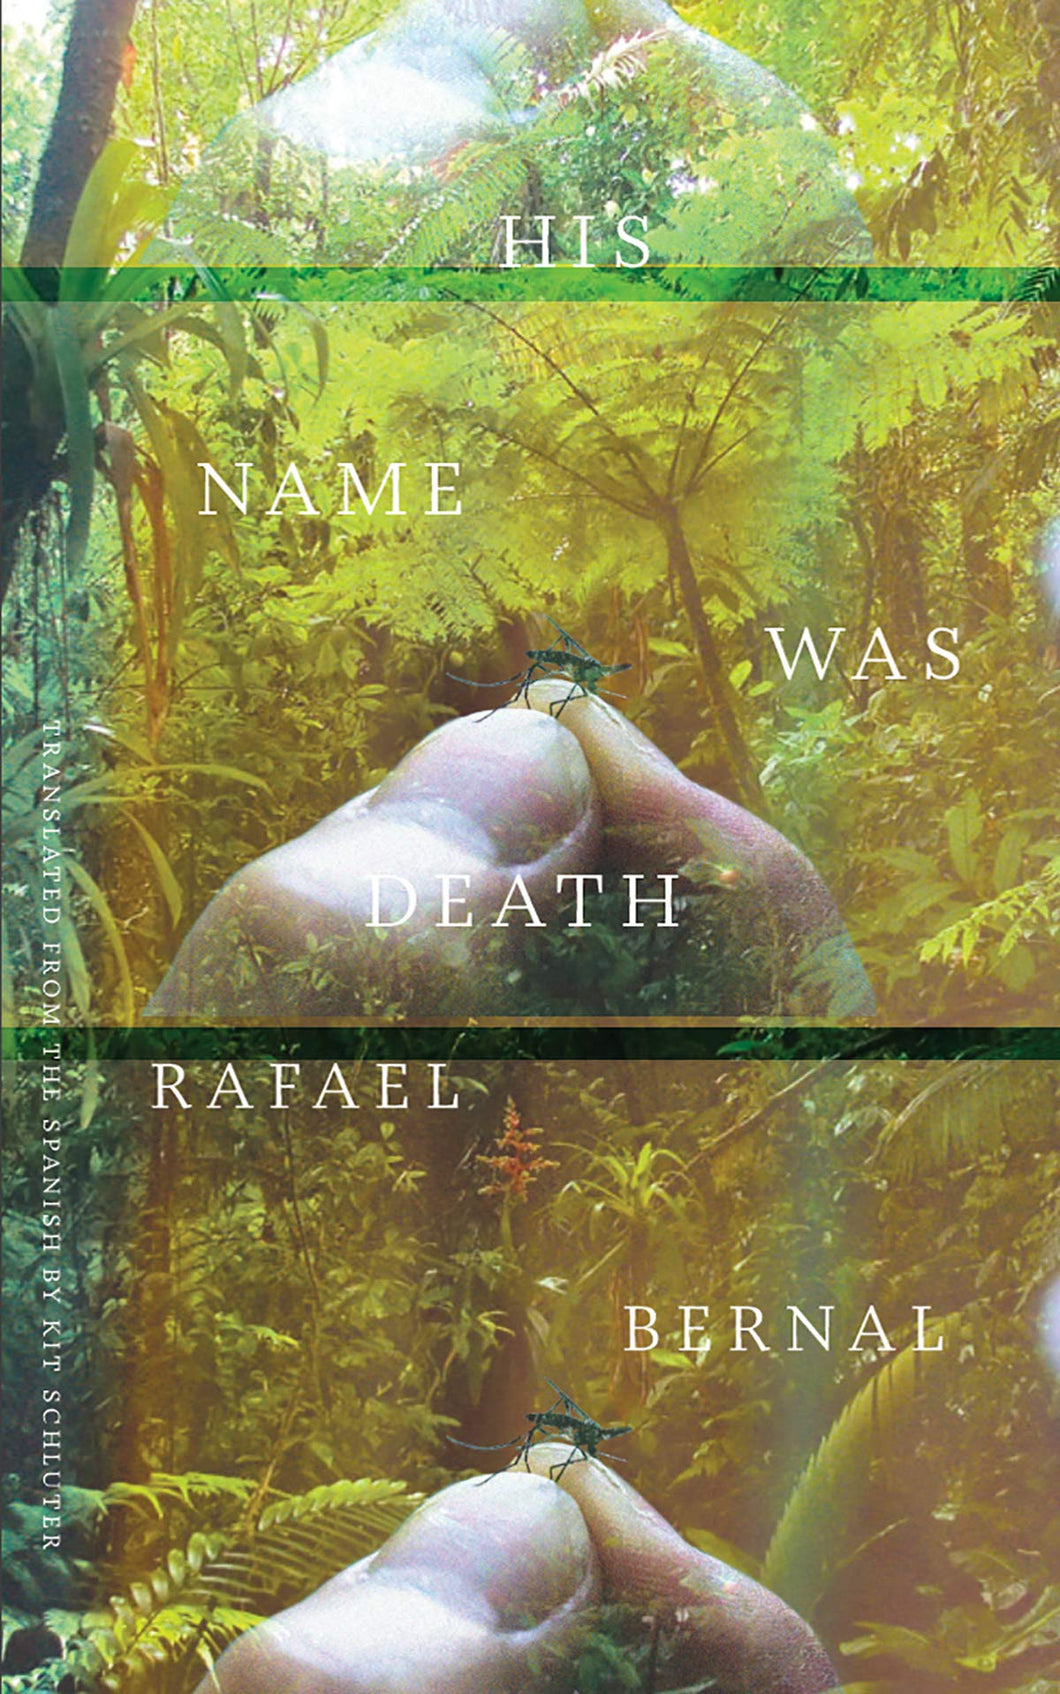 His Name was Death by Rafael Bernal